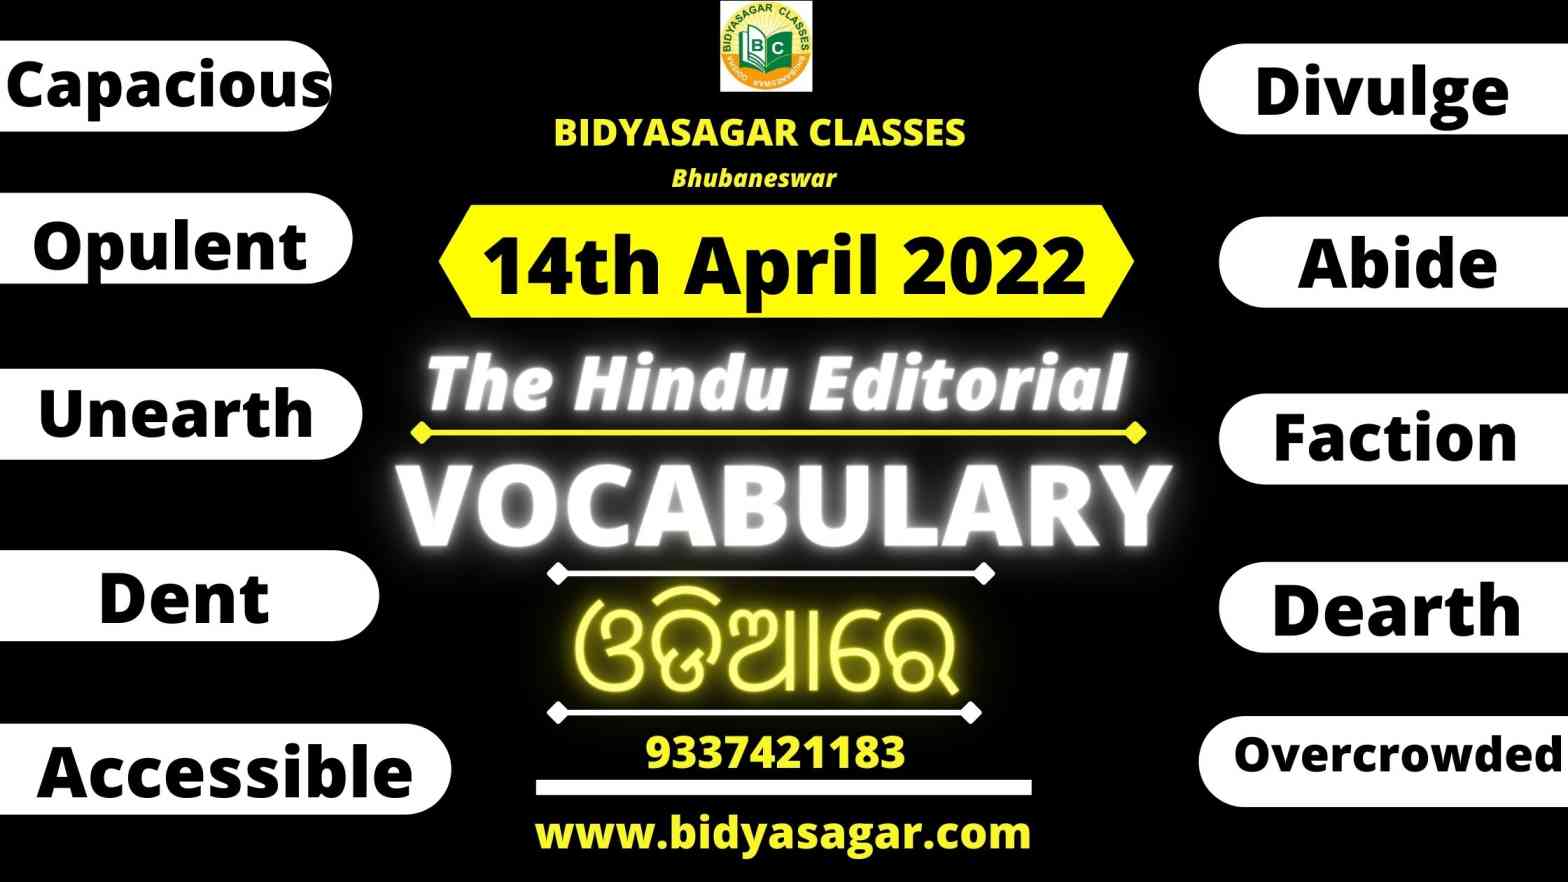 The Hindu Editorial Vocabulary of 14th April 2022